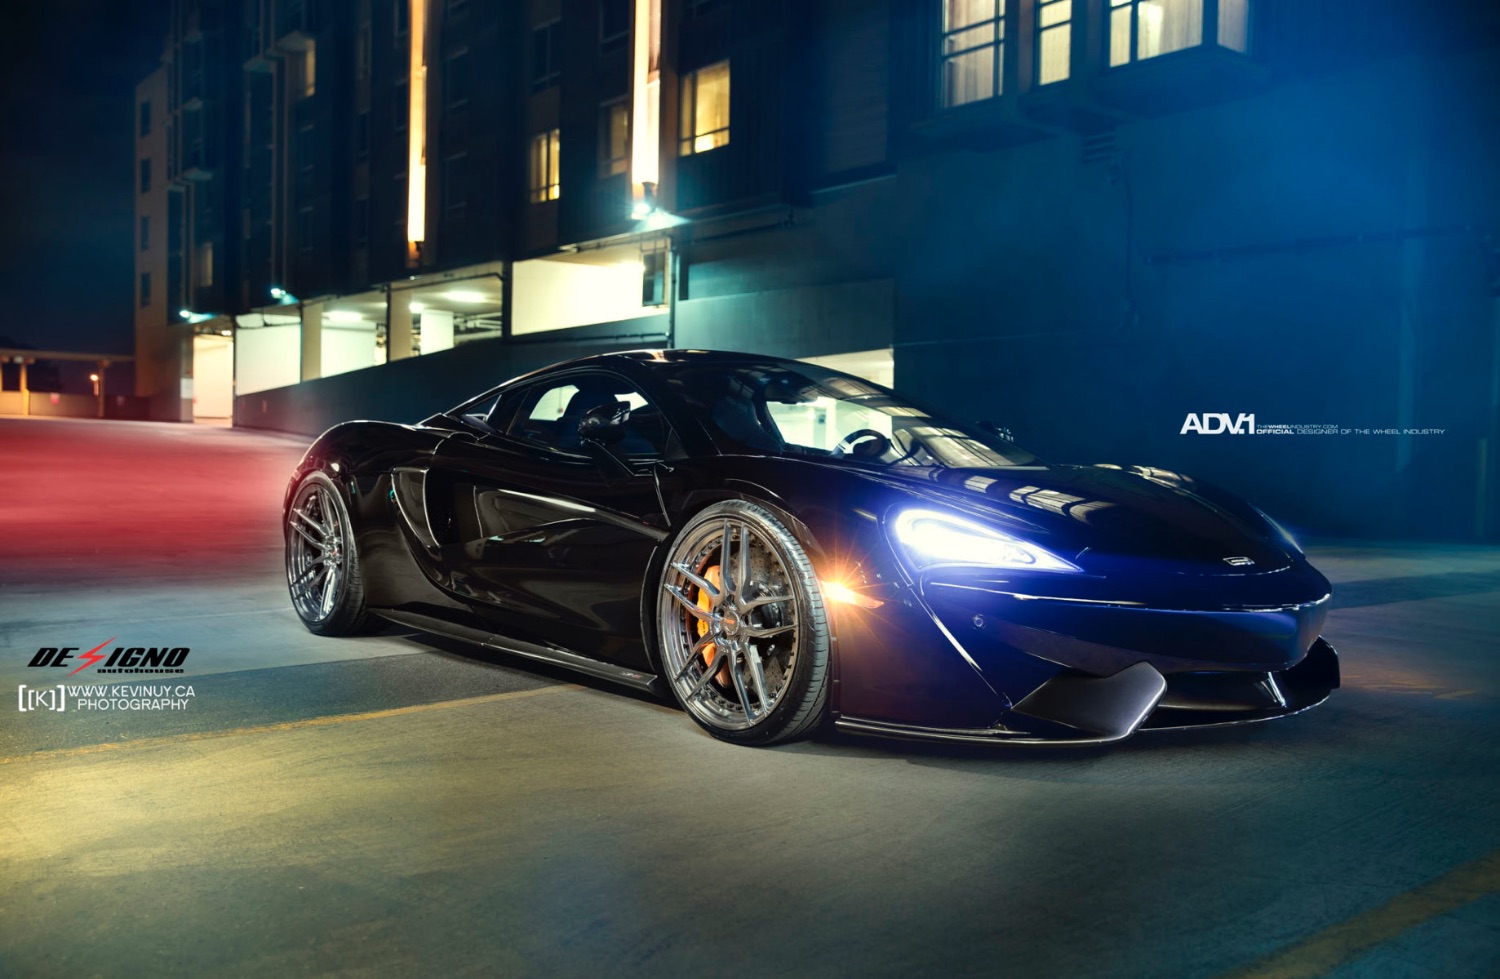 mclaren-570s-luxury-super-car-forged-racing-wheels-adv1-rims-aftermarket-A